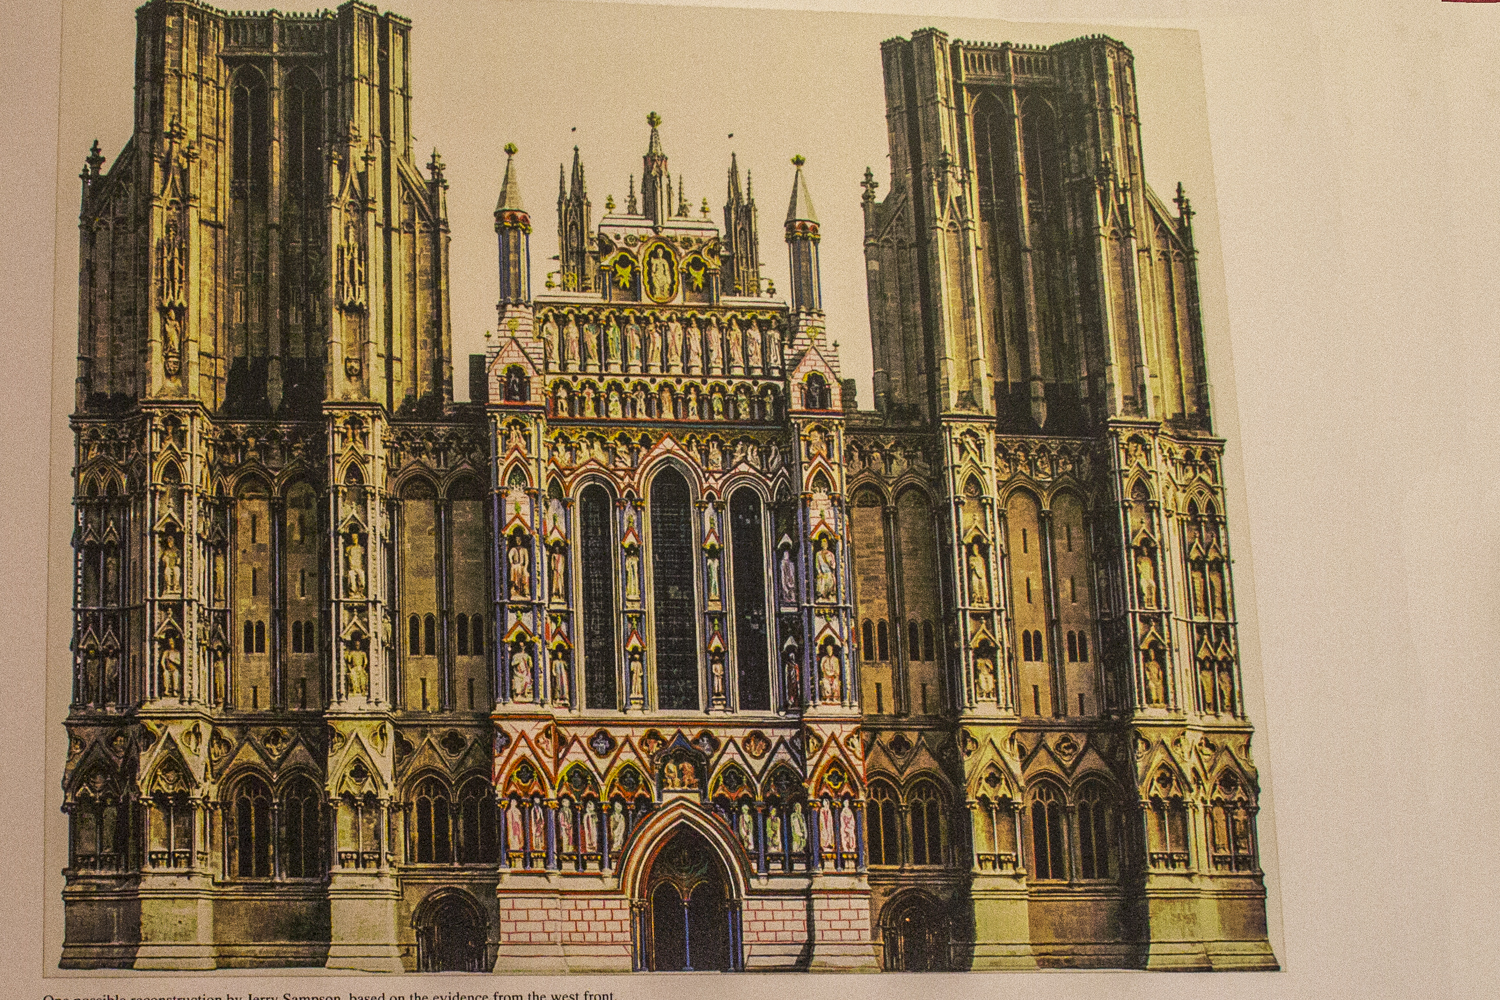 Original painted exterior of the Cathedral in Wells, Somerset, England    20185441